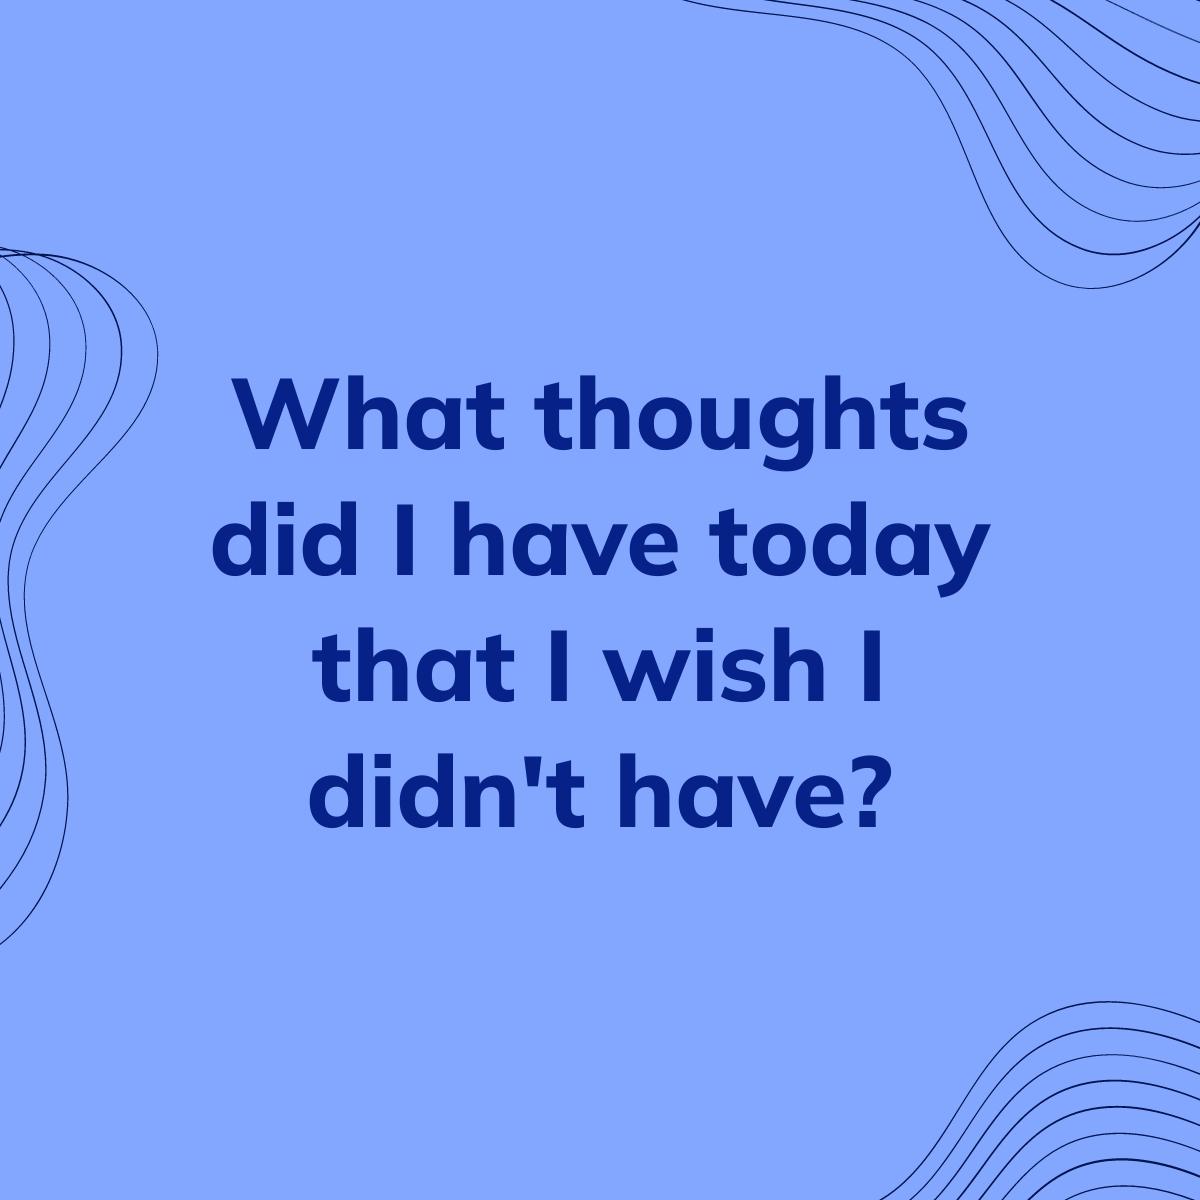 Journal Prompt: What thoughts did I have today that I wish I didn't have?